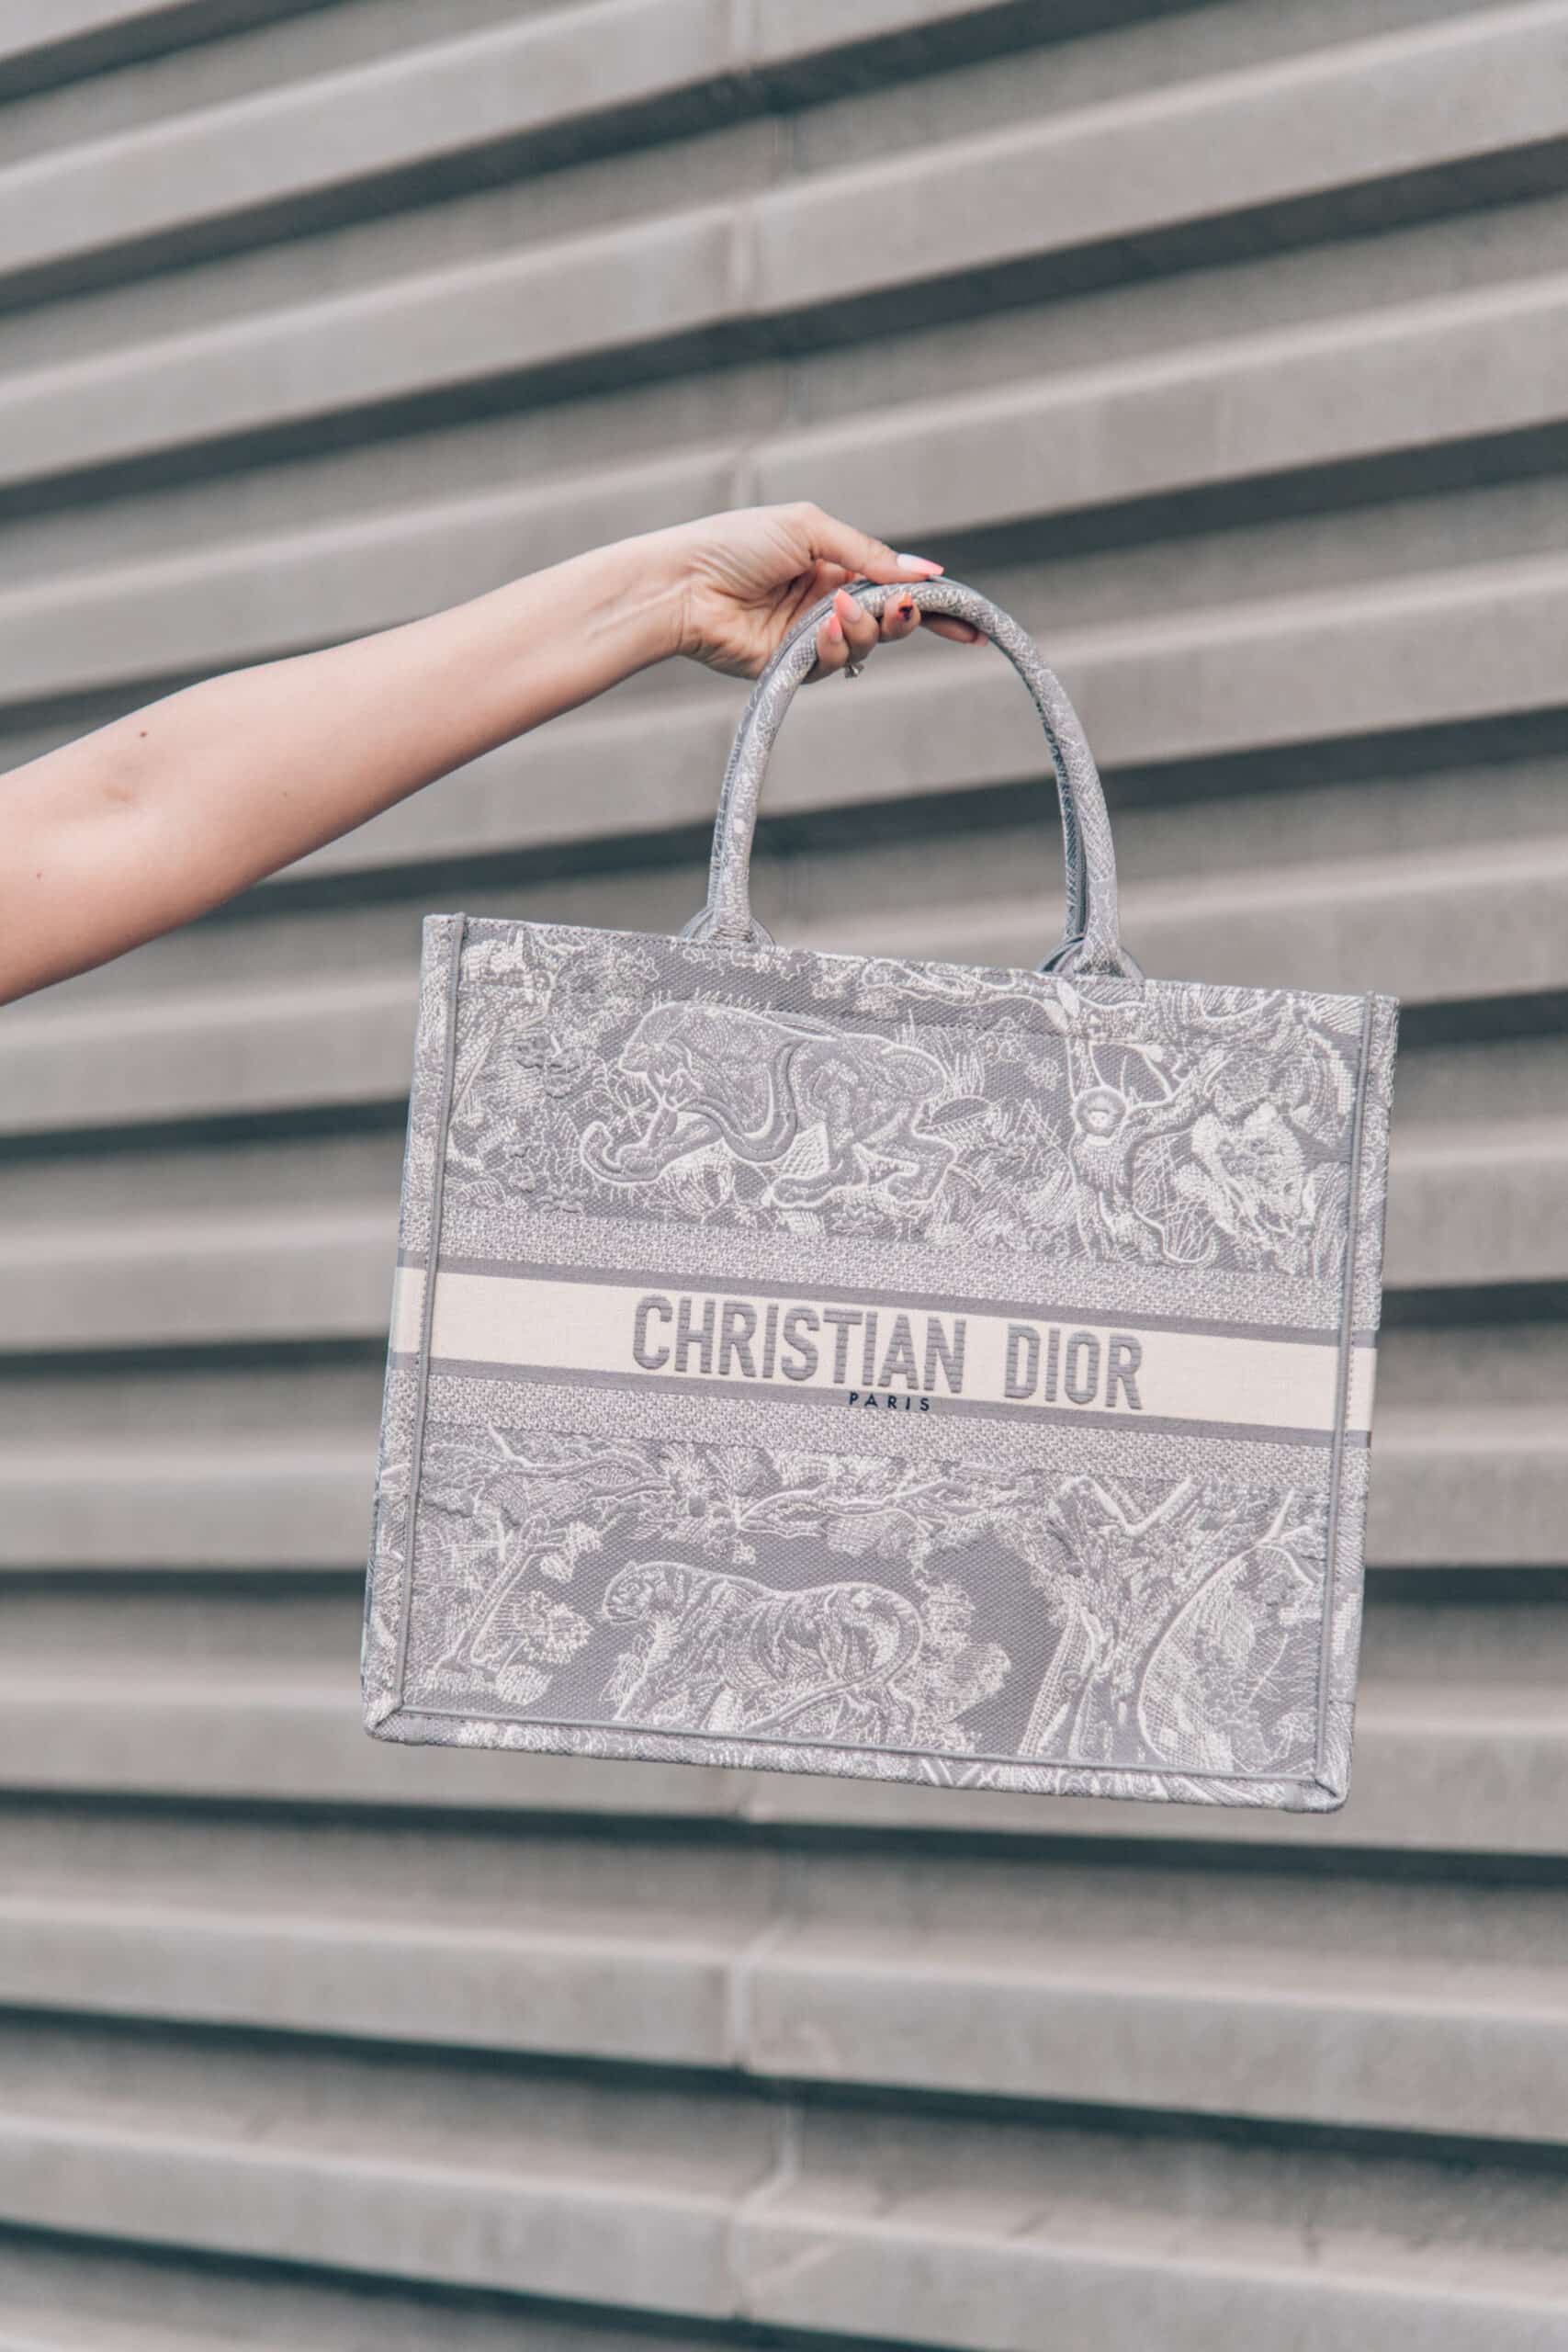 The best Christian dior tote bag dupe, by fashion blogger What The Fab